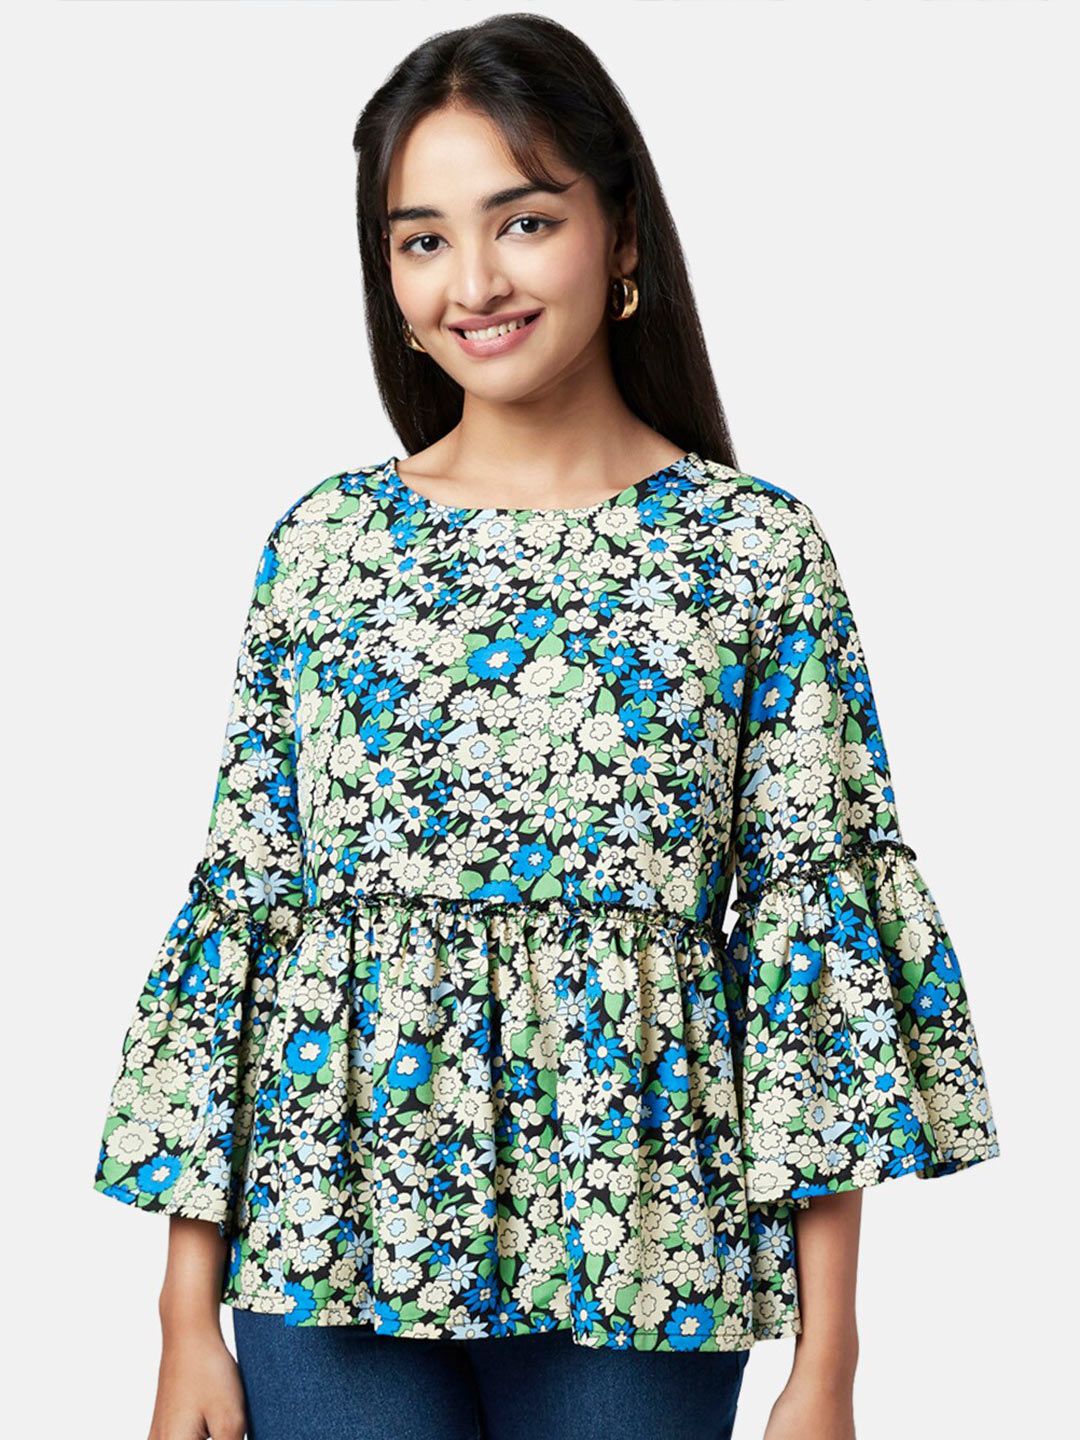 YU by Pantaloons Blue Floral Print Top Price in India